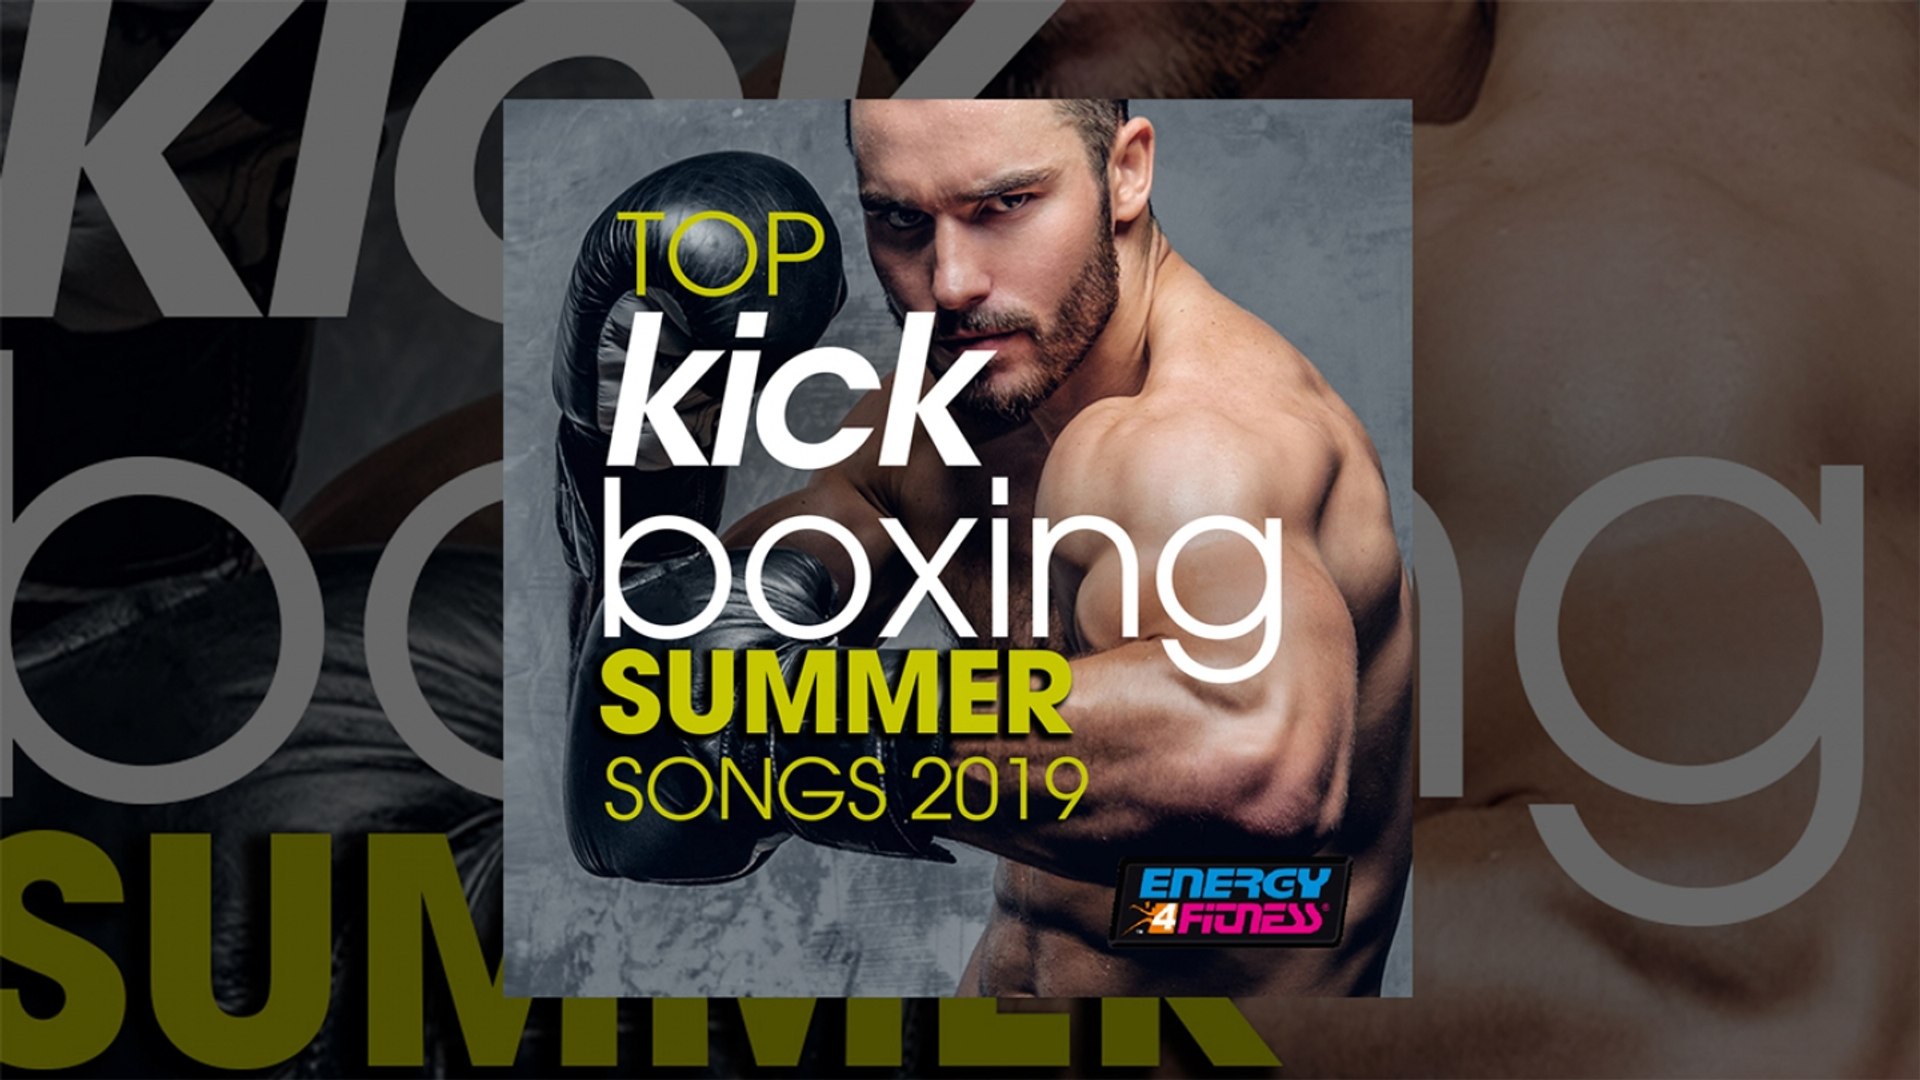 E4F - Top Kick Boxing Summer Songs 2019 - Fitness & Music 2019